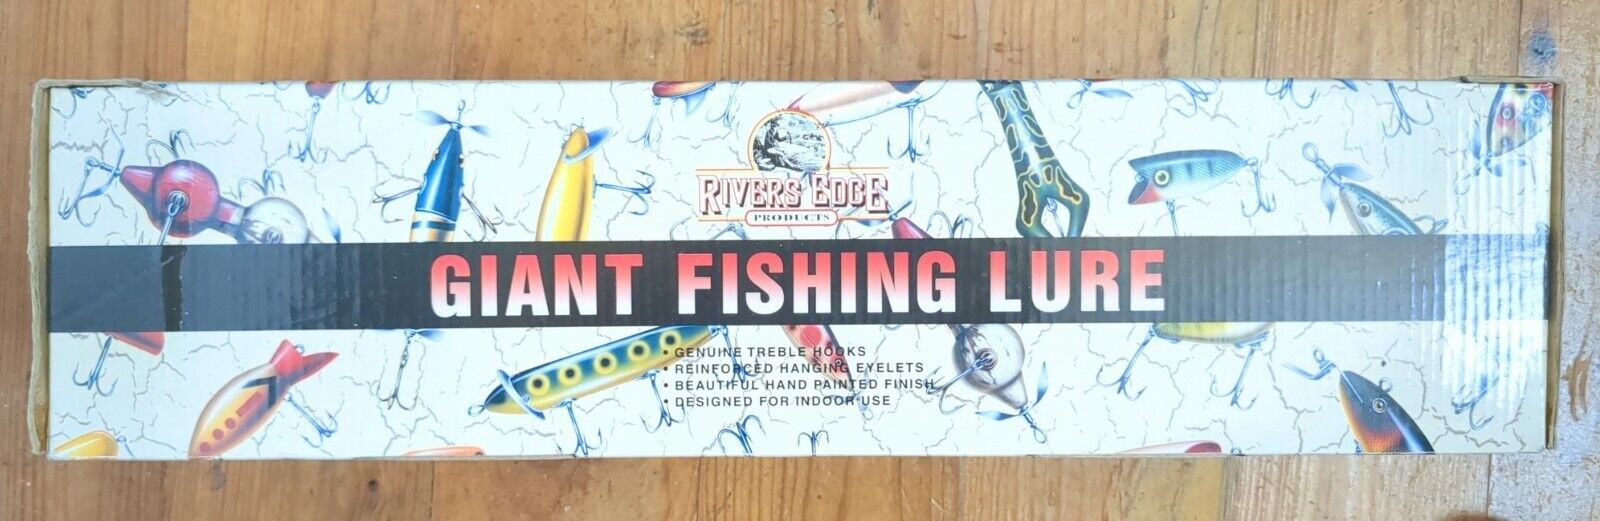 Rivers Edge Novelty Giant Fishing Lure 18 L With Box Angler's Man Cave  Vintage – ASA College: Florida